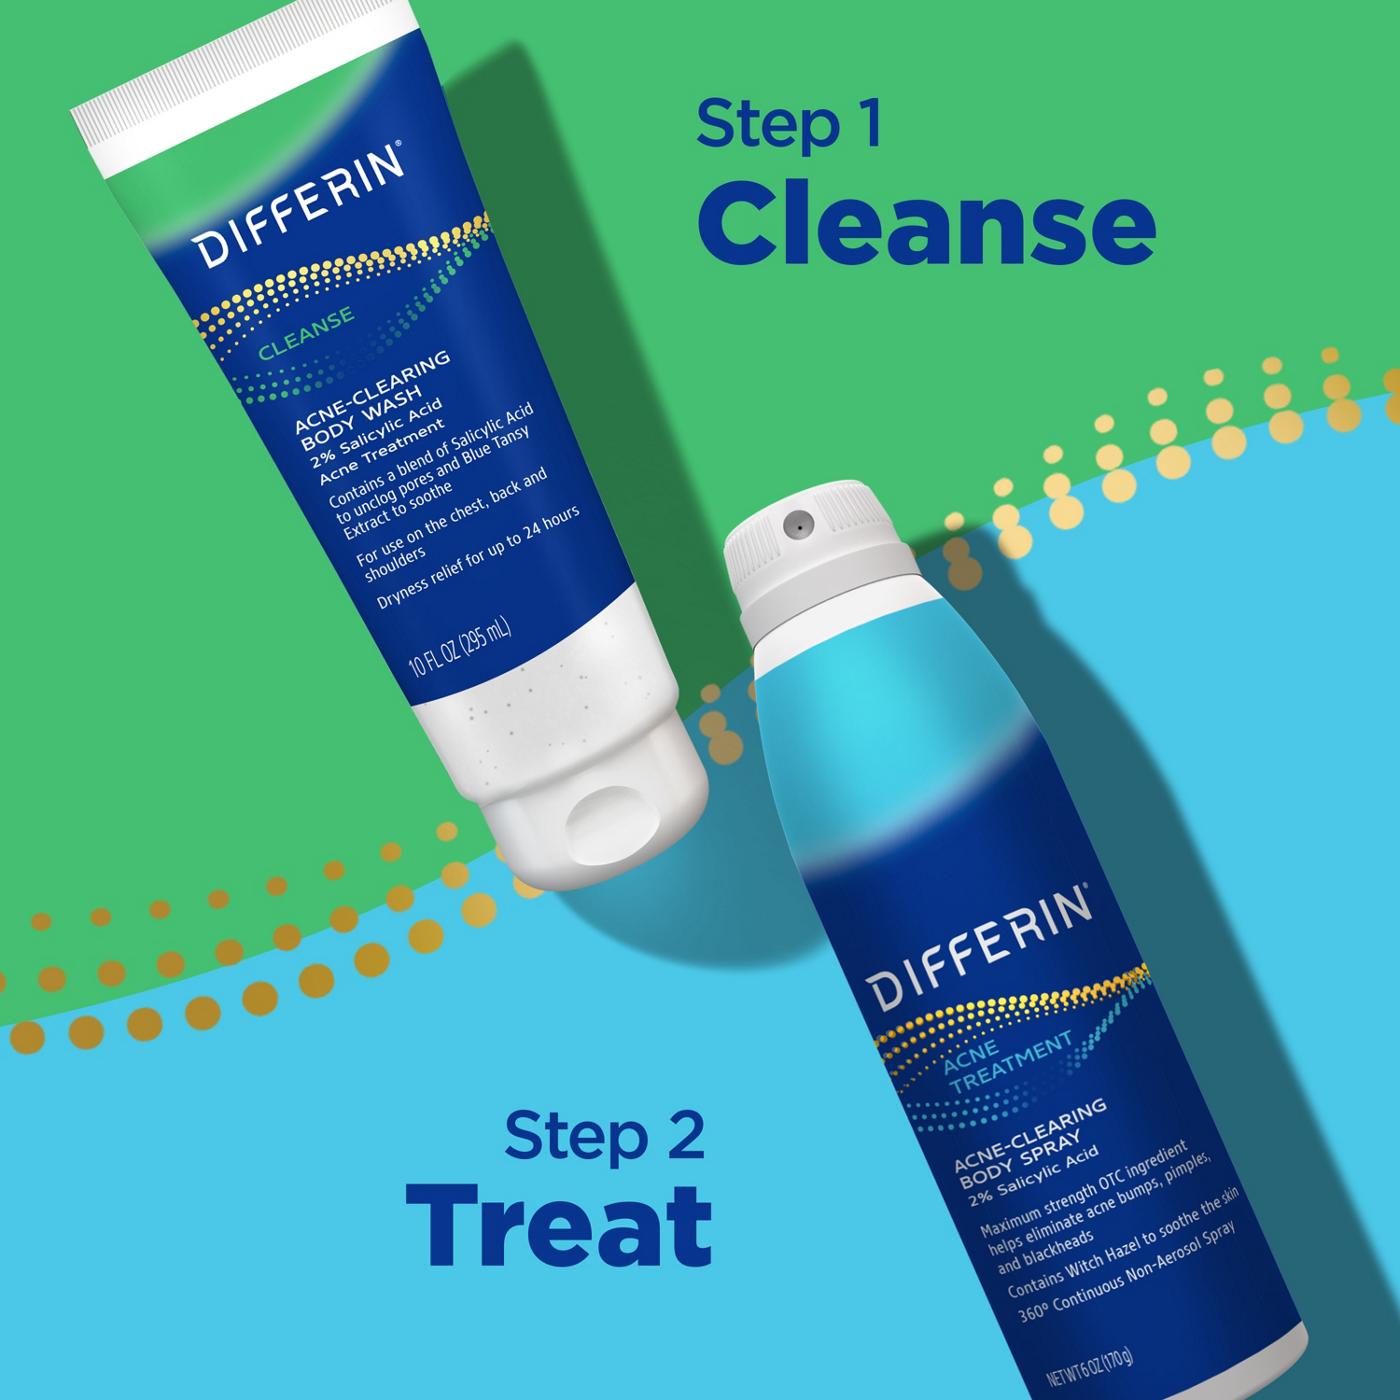 Differin Acne-Clearing Body Spray; image 2 of 3